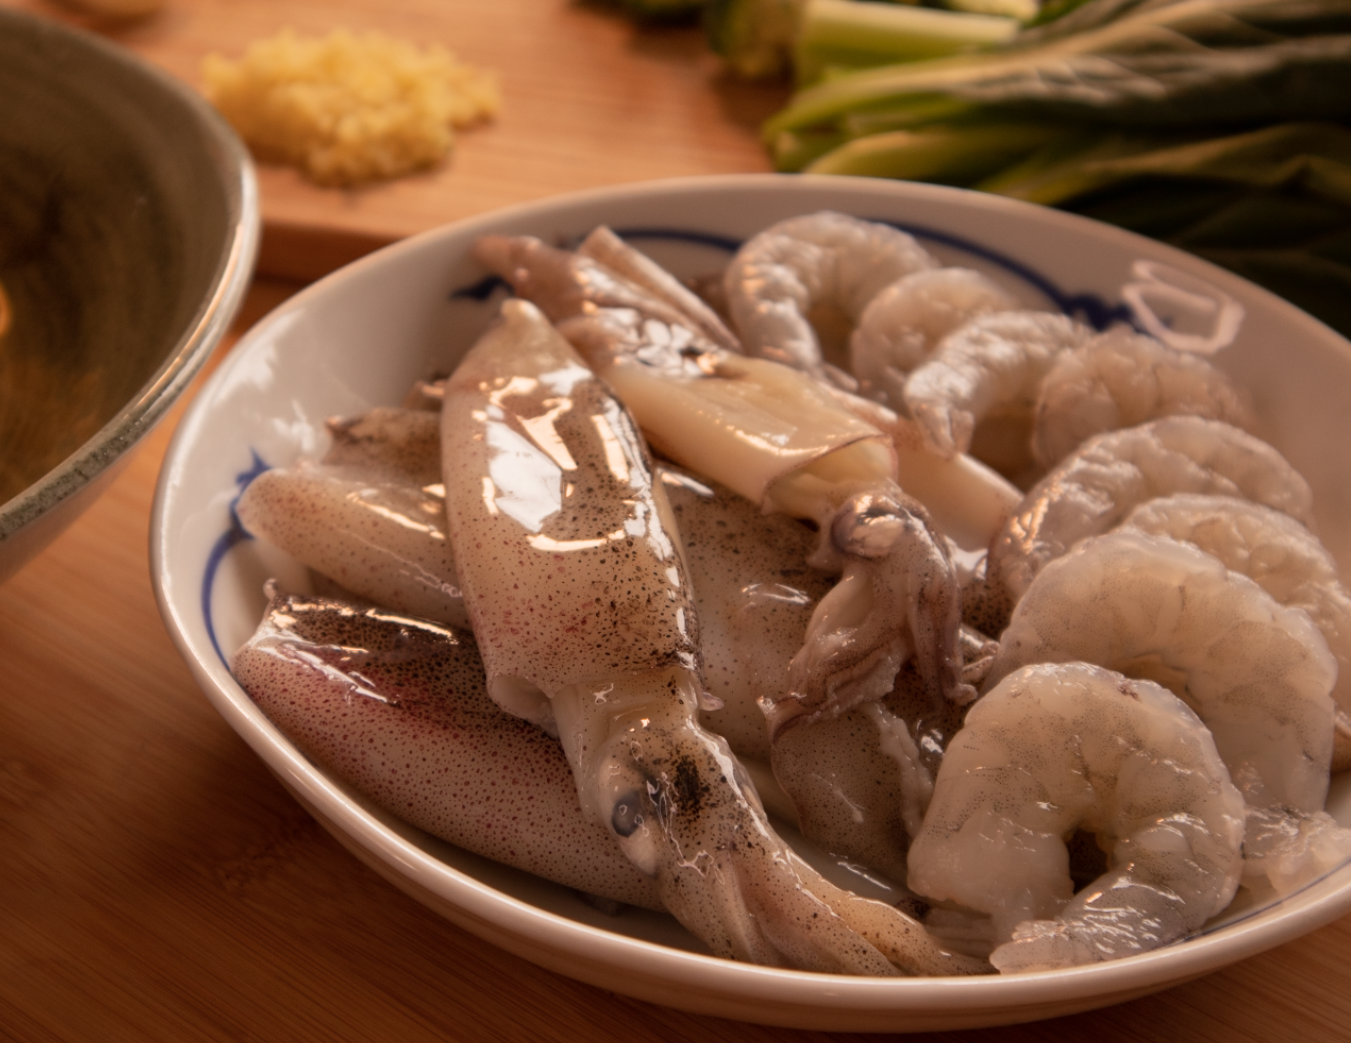 Raw baby squid and peeled king prawns